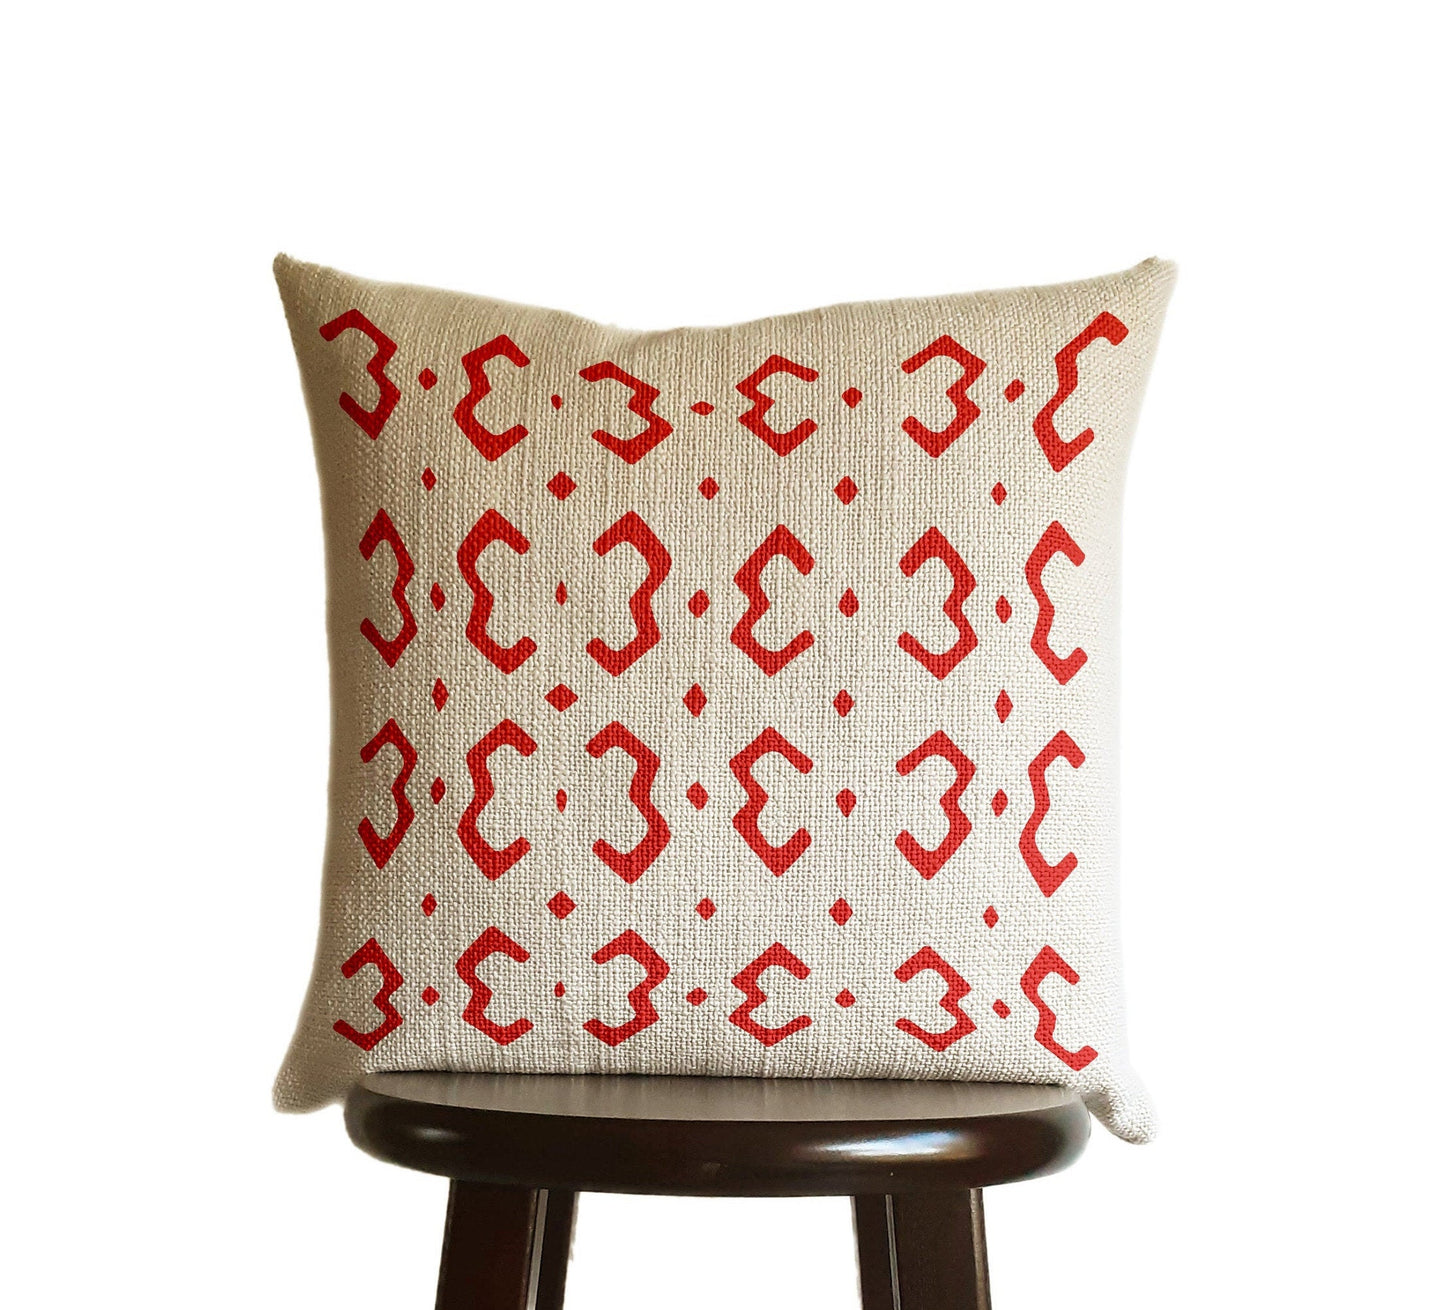 Bright Scarlet Red Pillow Cover, Tribal Urban Ethnic Square 18x18 in Natural Oatmeal Color Textured Woven Fabric in Modern Boho Home Decor